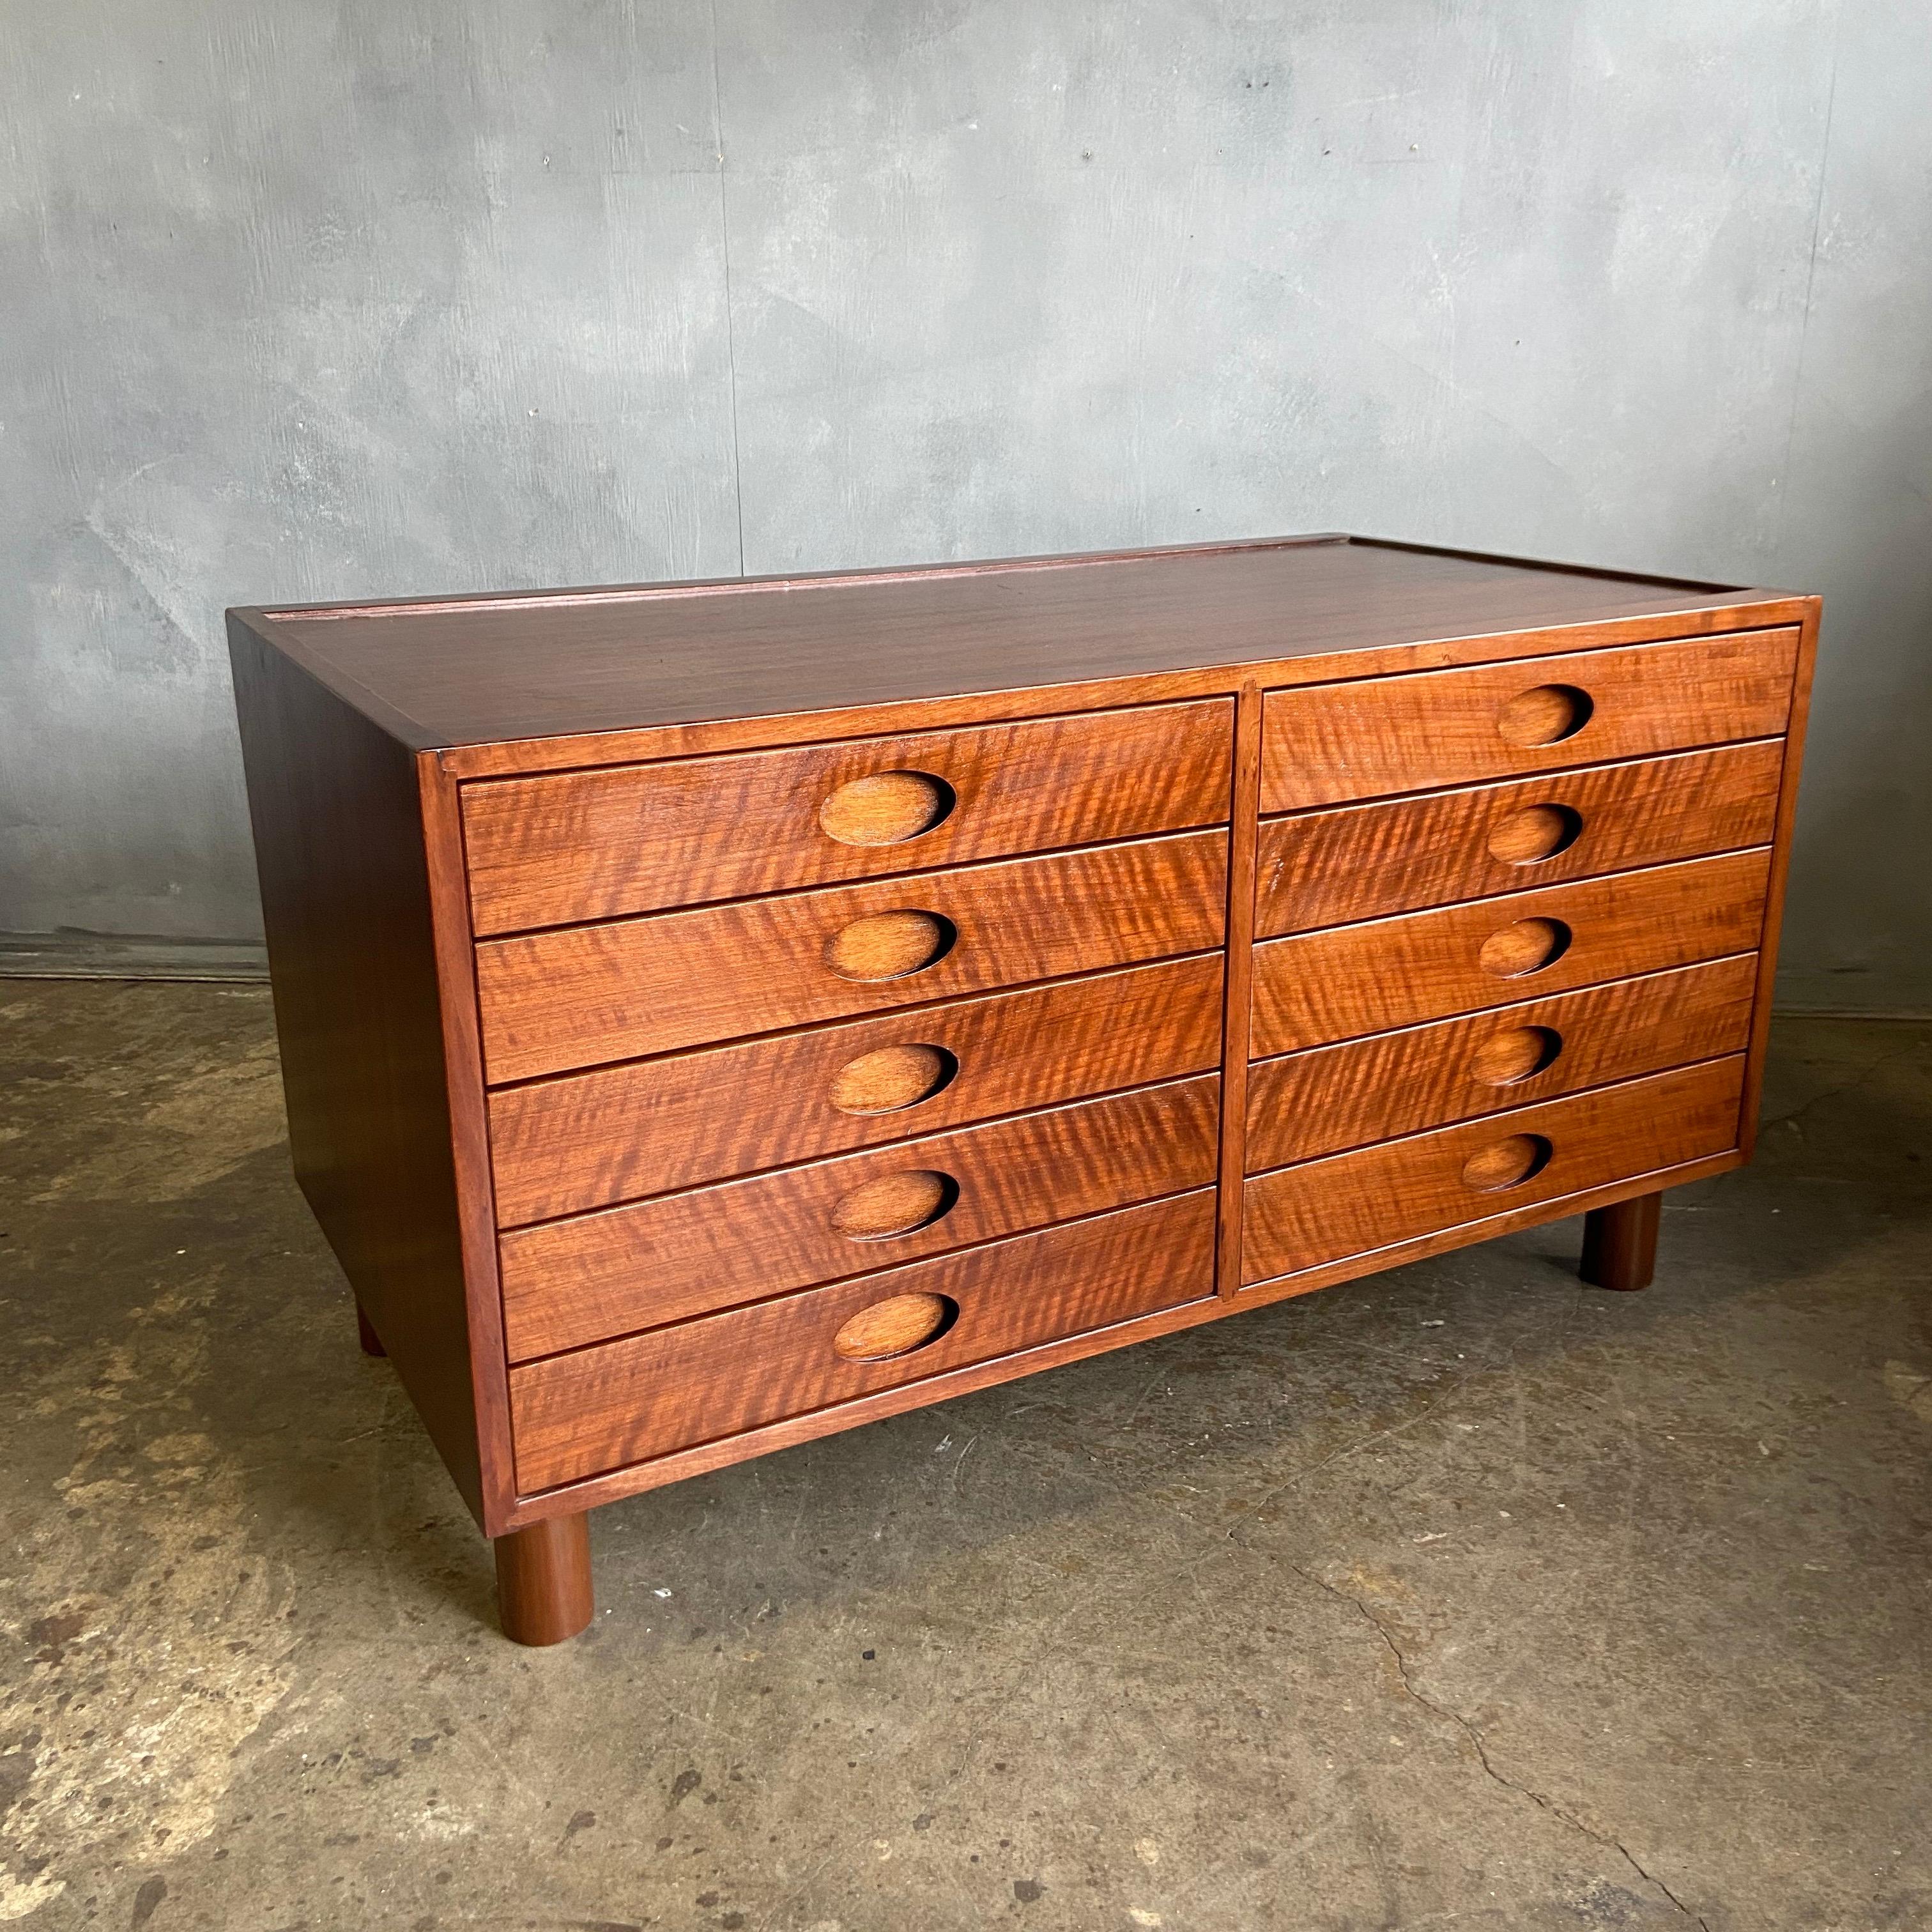 For your consideration is this beautiful 10-drawer dresser featuring high quality craftsmanship with a beautiful wood grain. A very substantial chest in a small package. In original condition with minor imperfections as expected and ready for use.